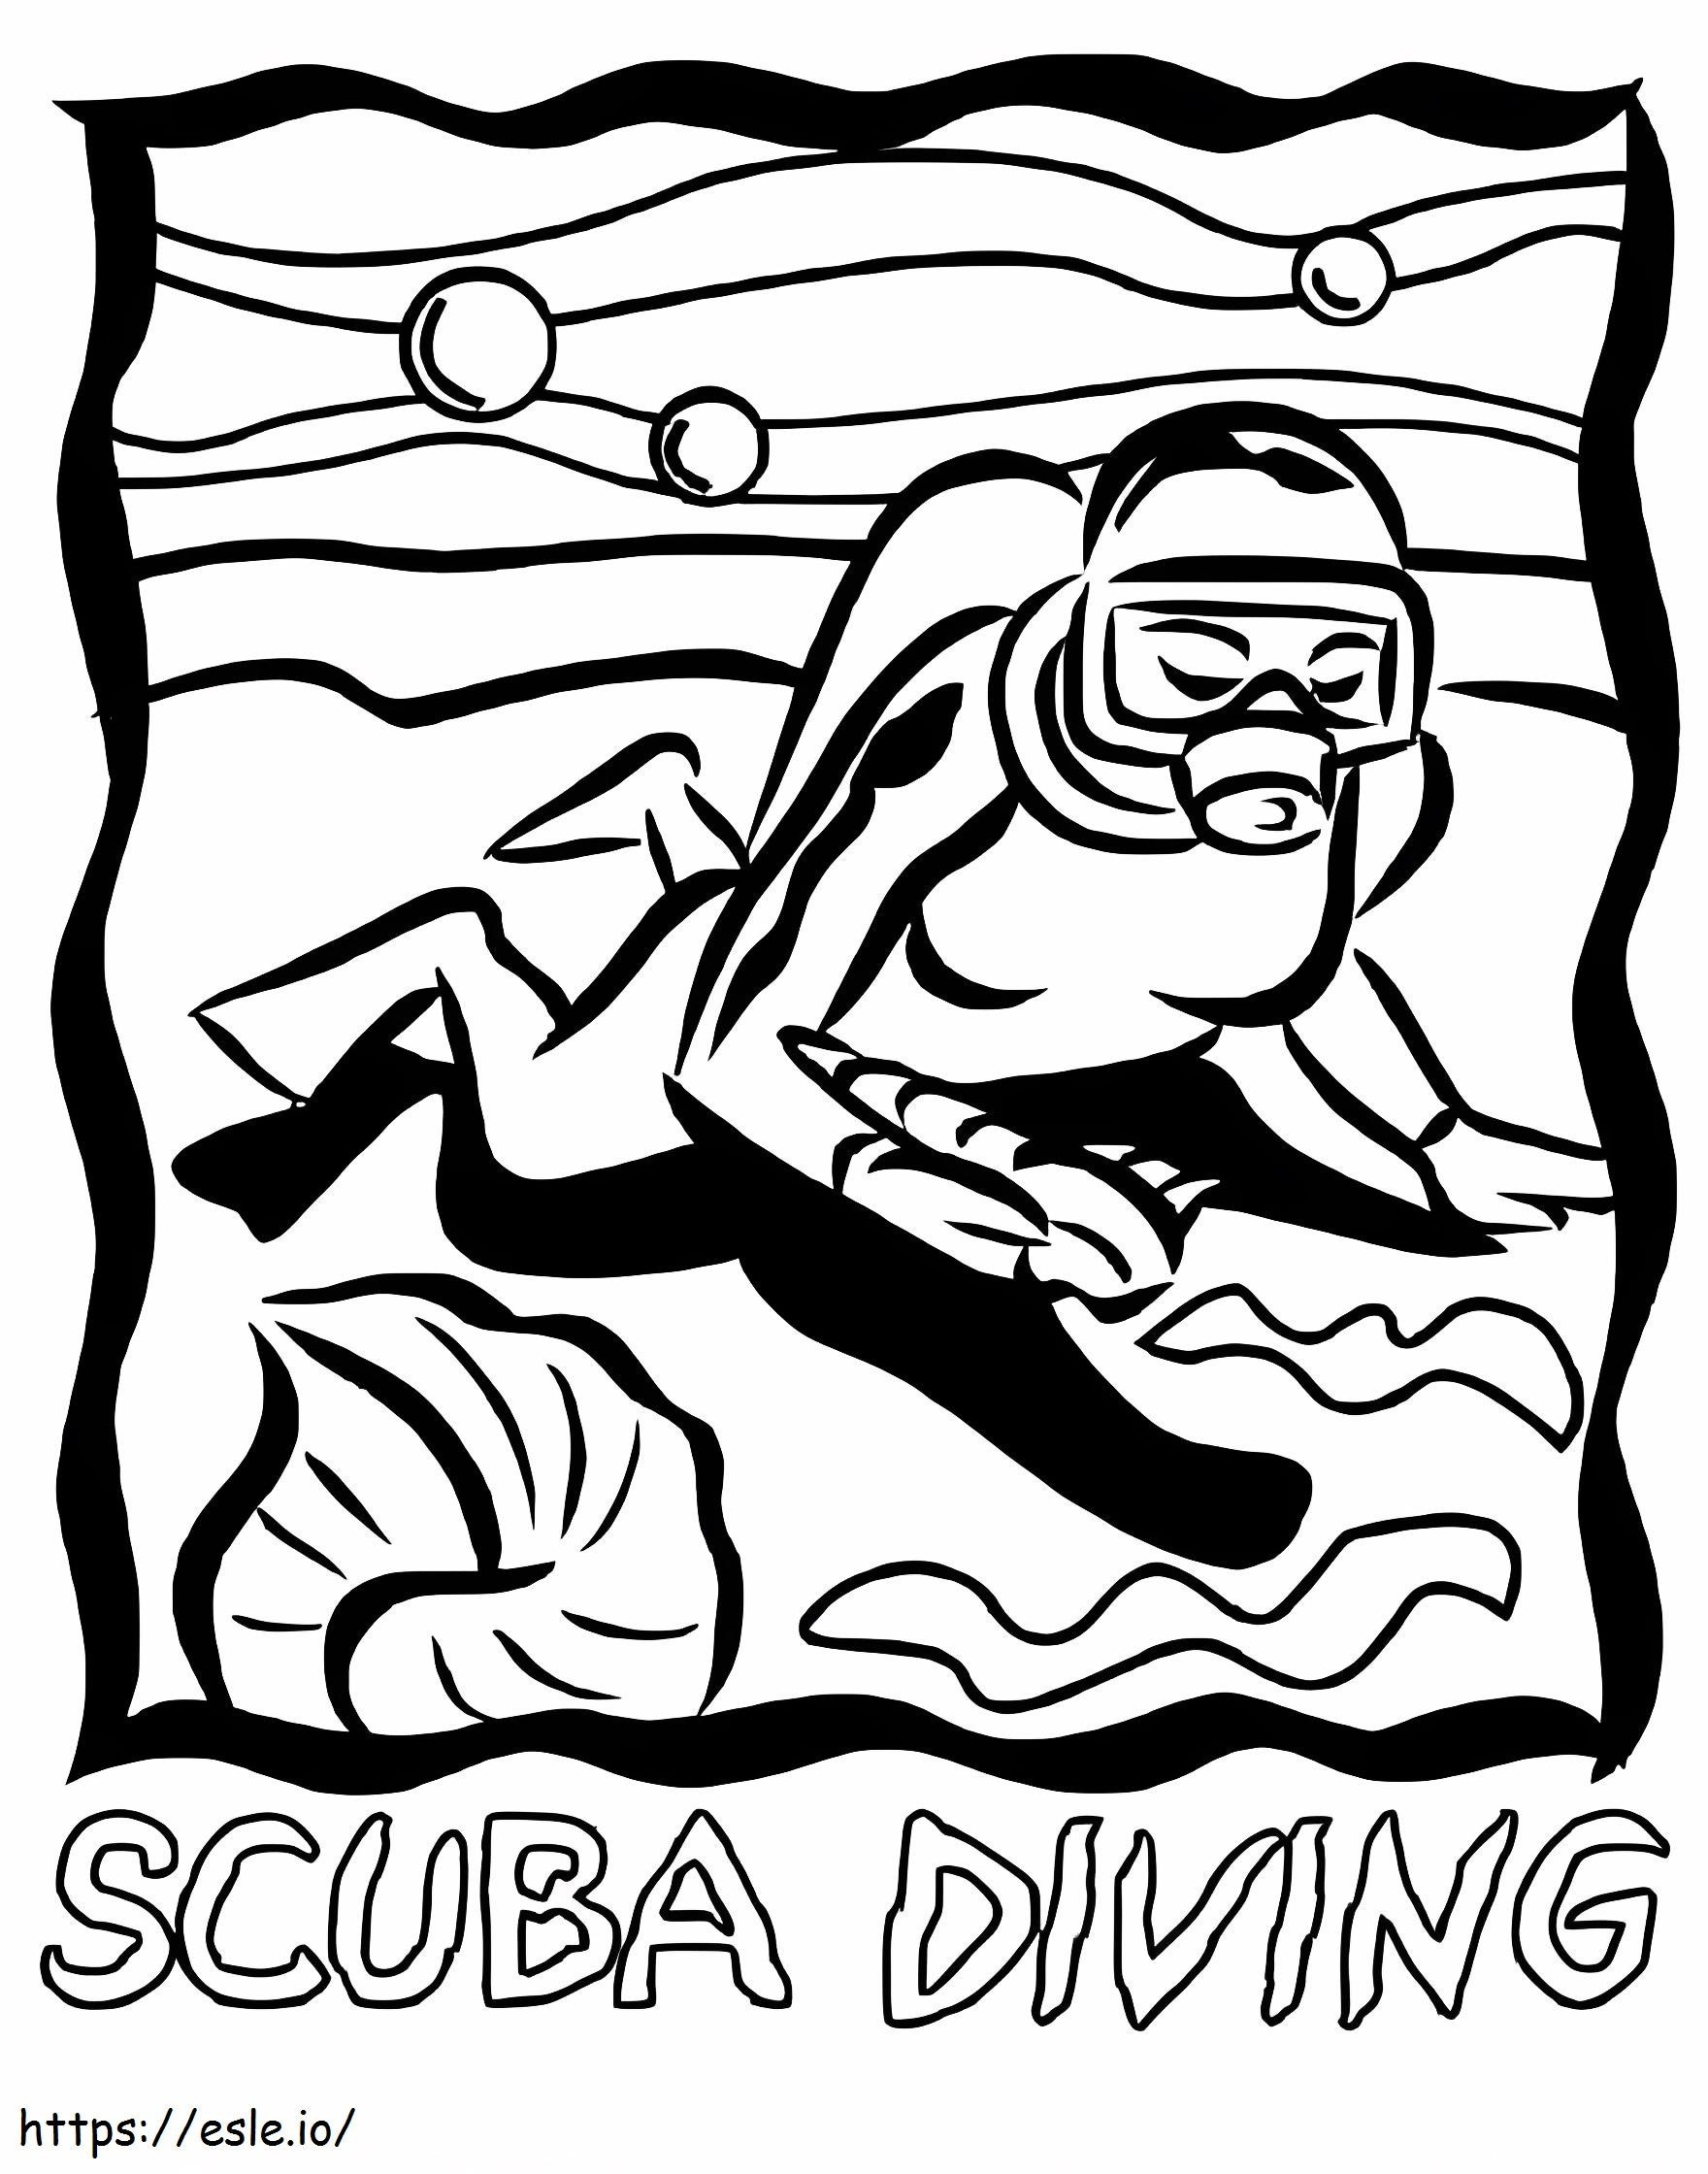 Printable Scuba Diving coloring page